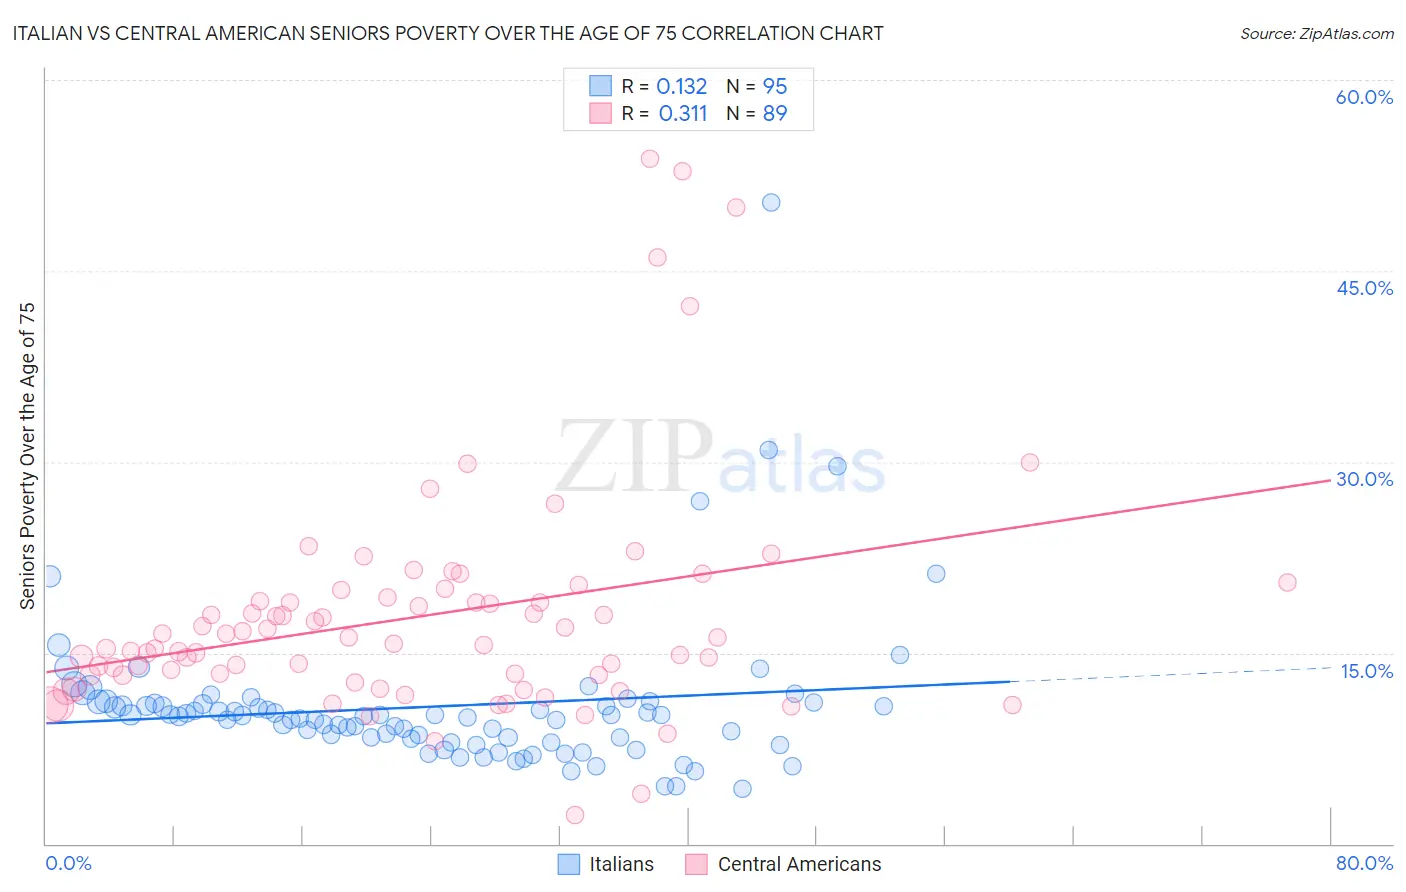 Italian vs Central American Seniors Poverty Over the Age of 75